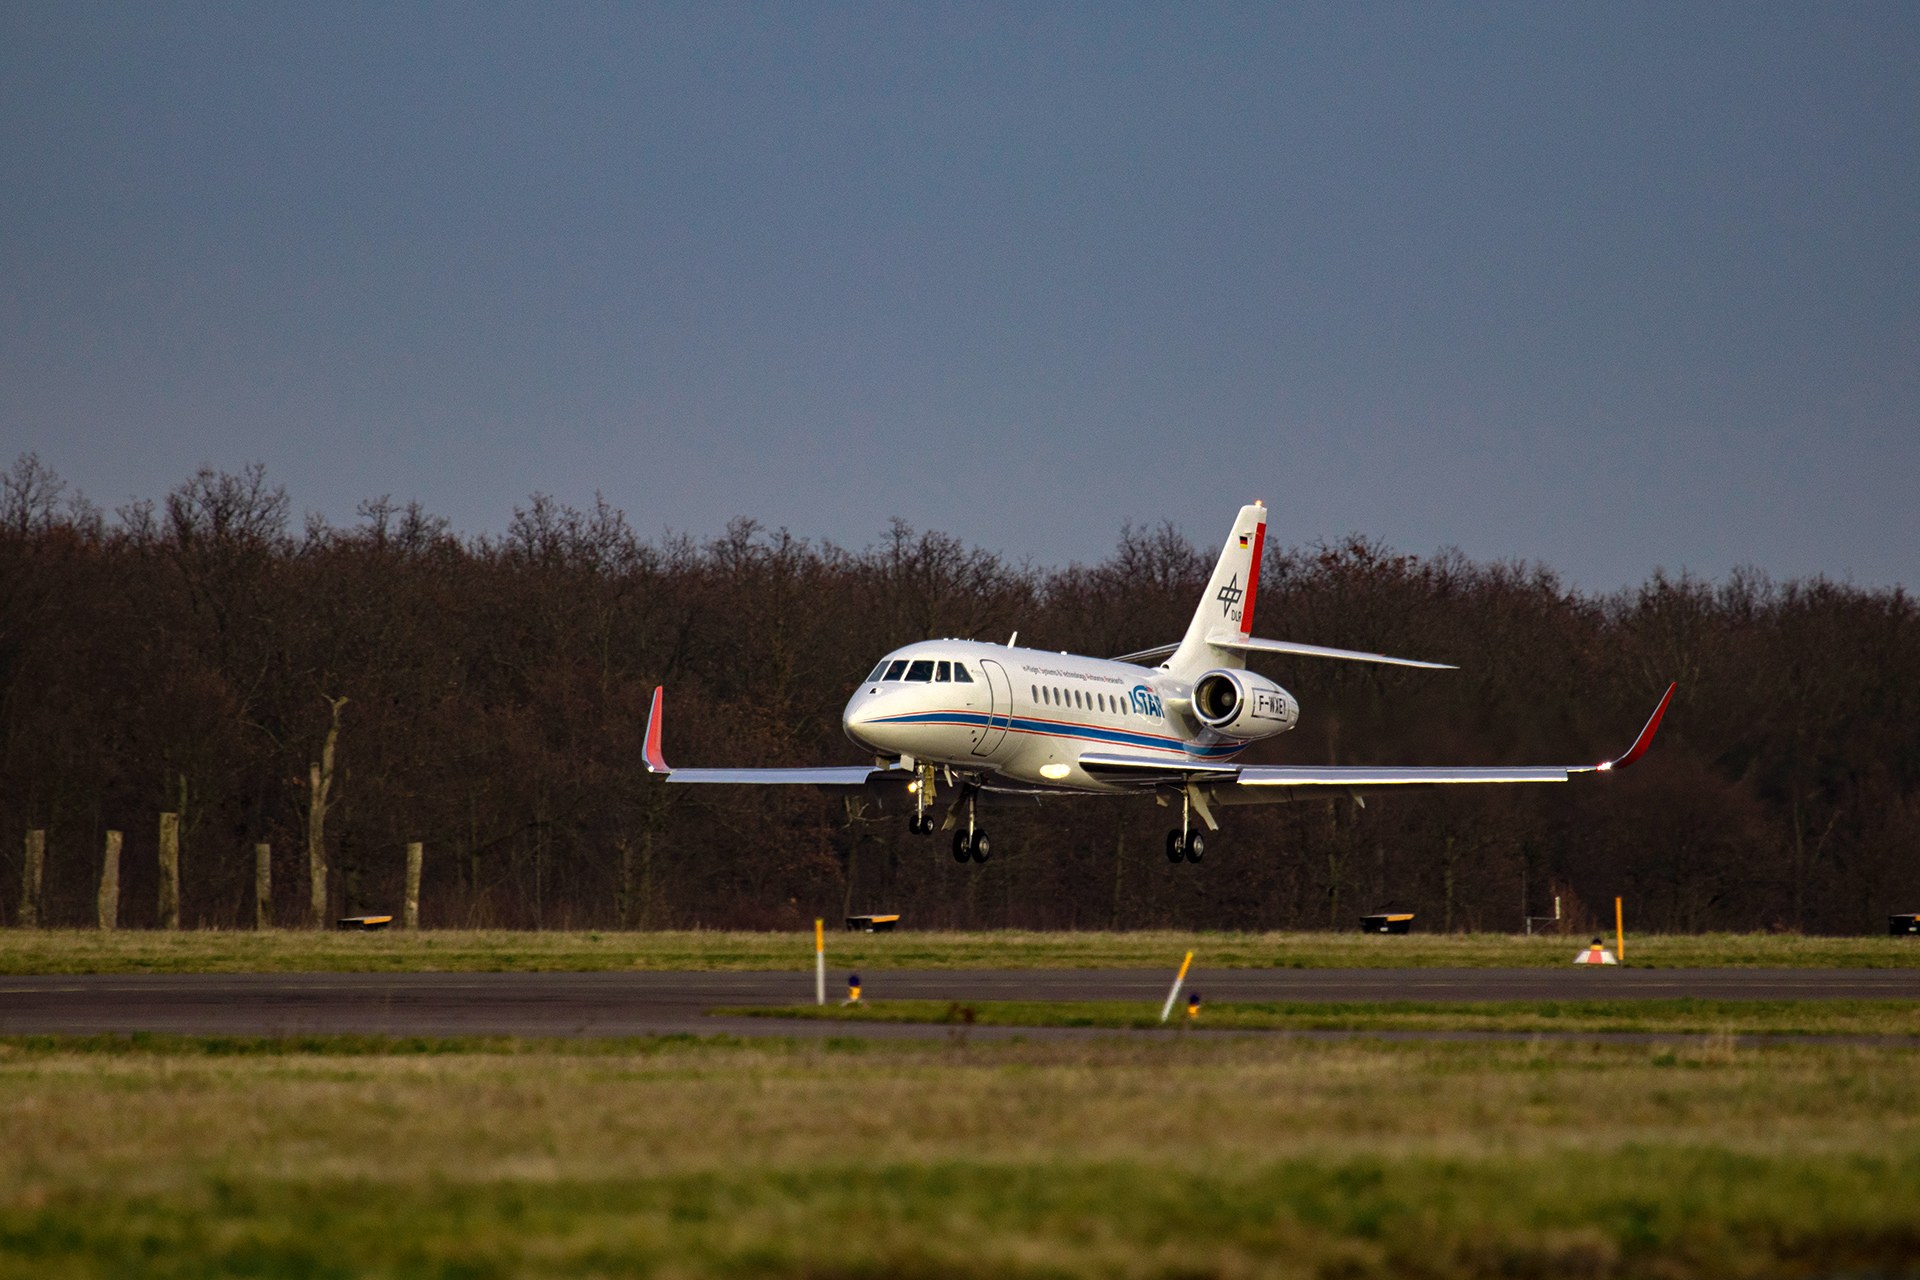 ISTAR landing in Braunschweig for the first time